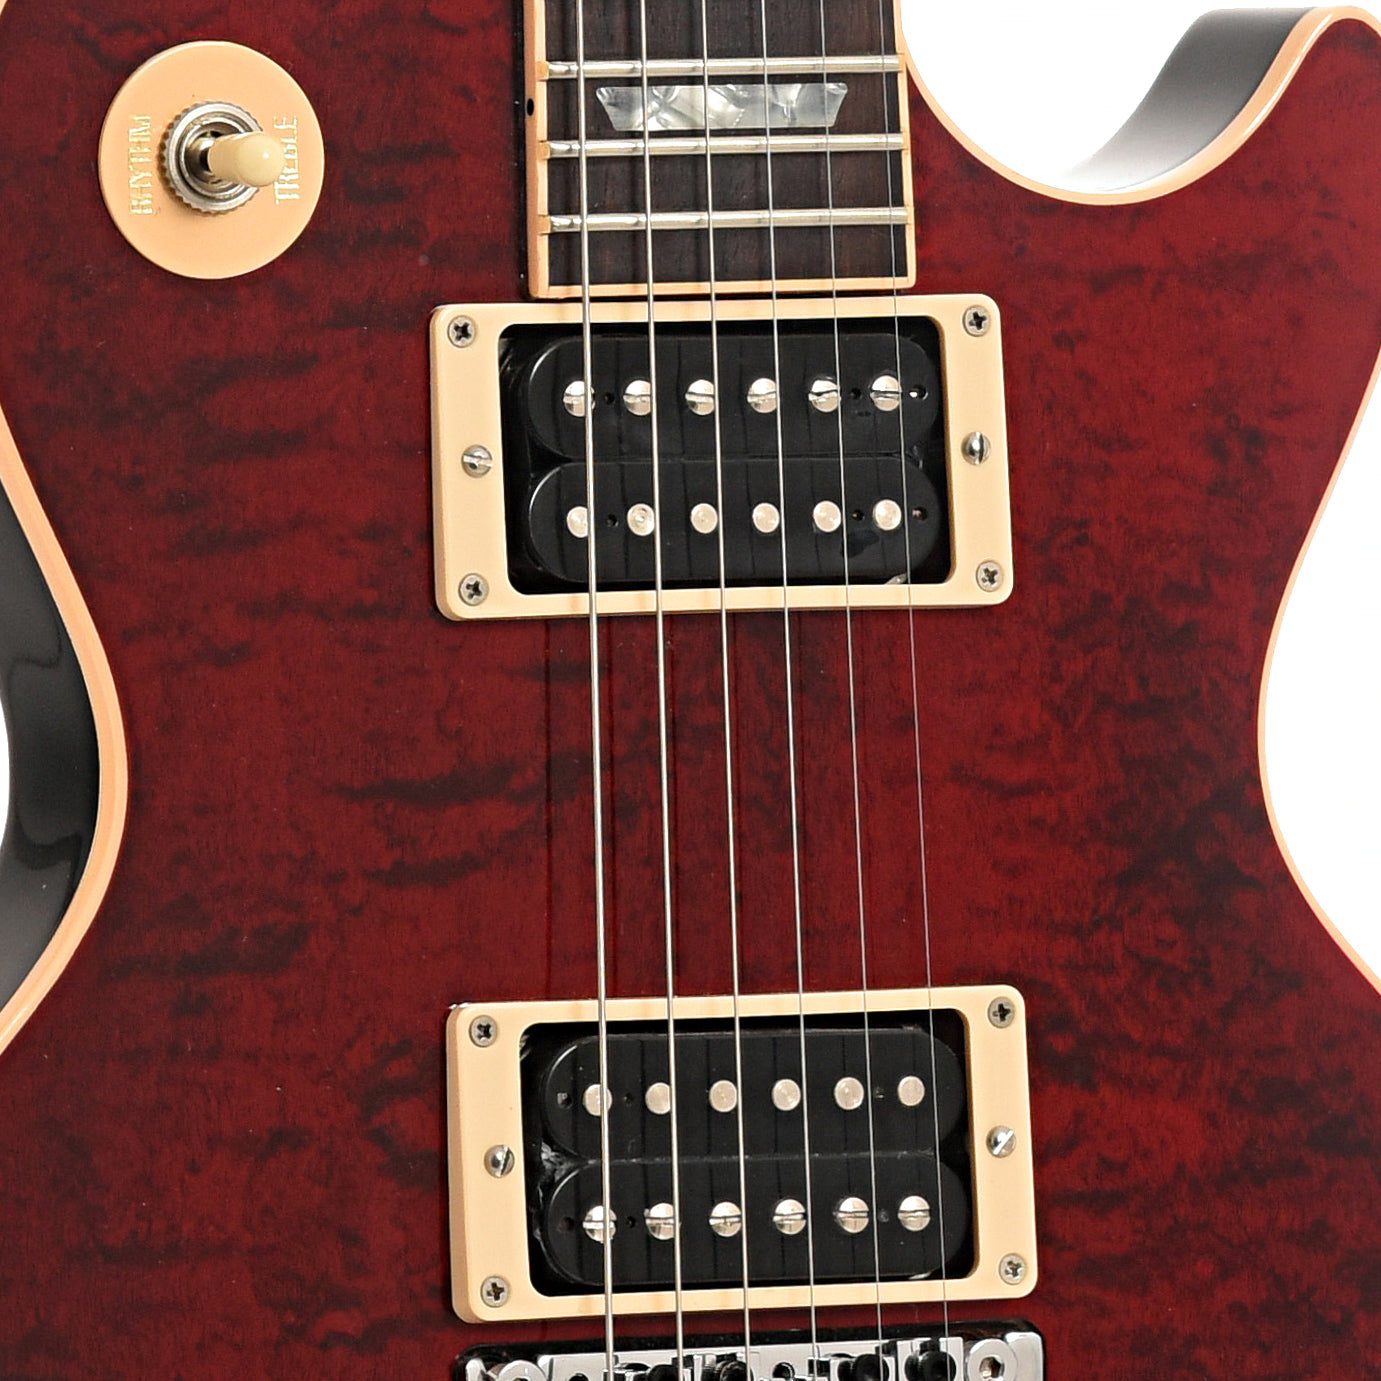 Pickups of Gibson Les Paul Axcess Electric Guitar